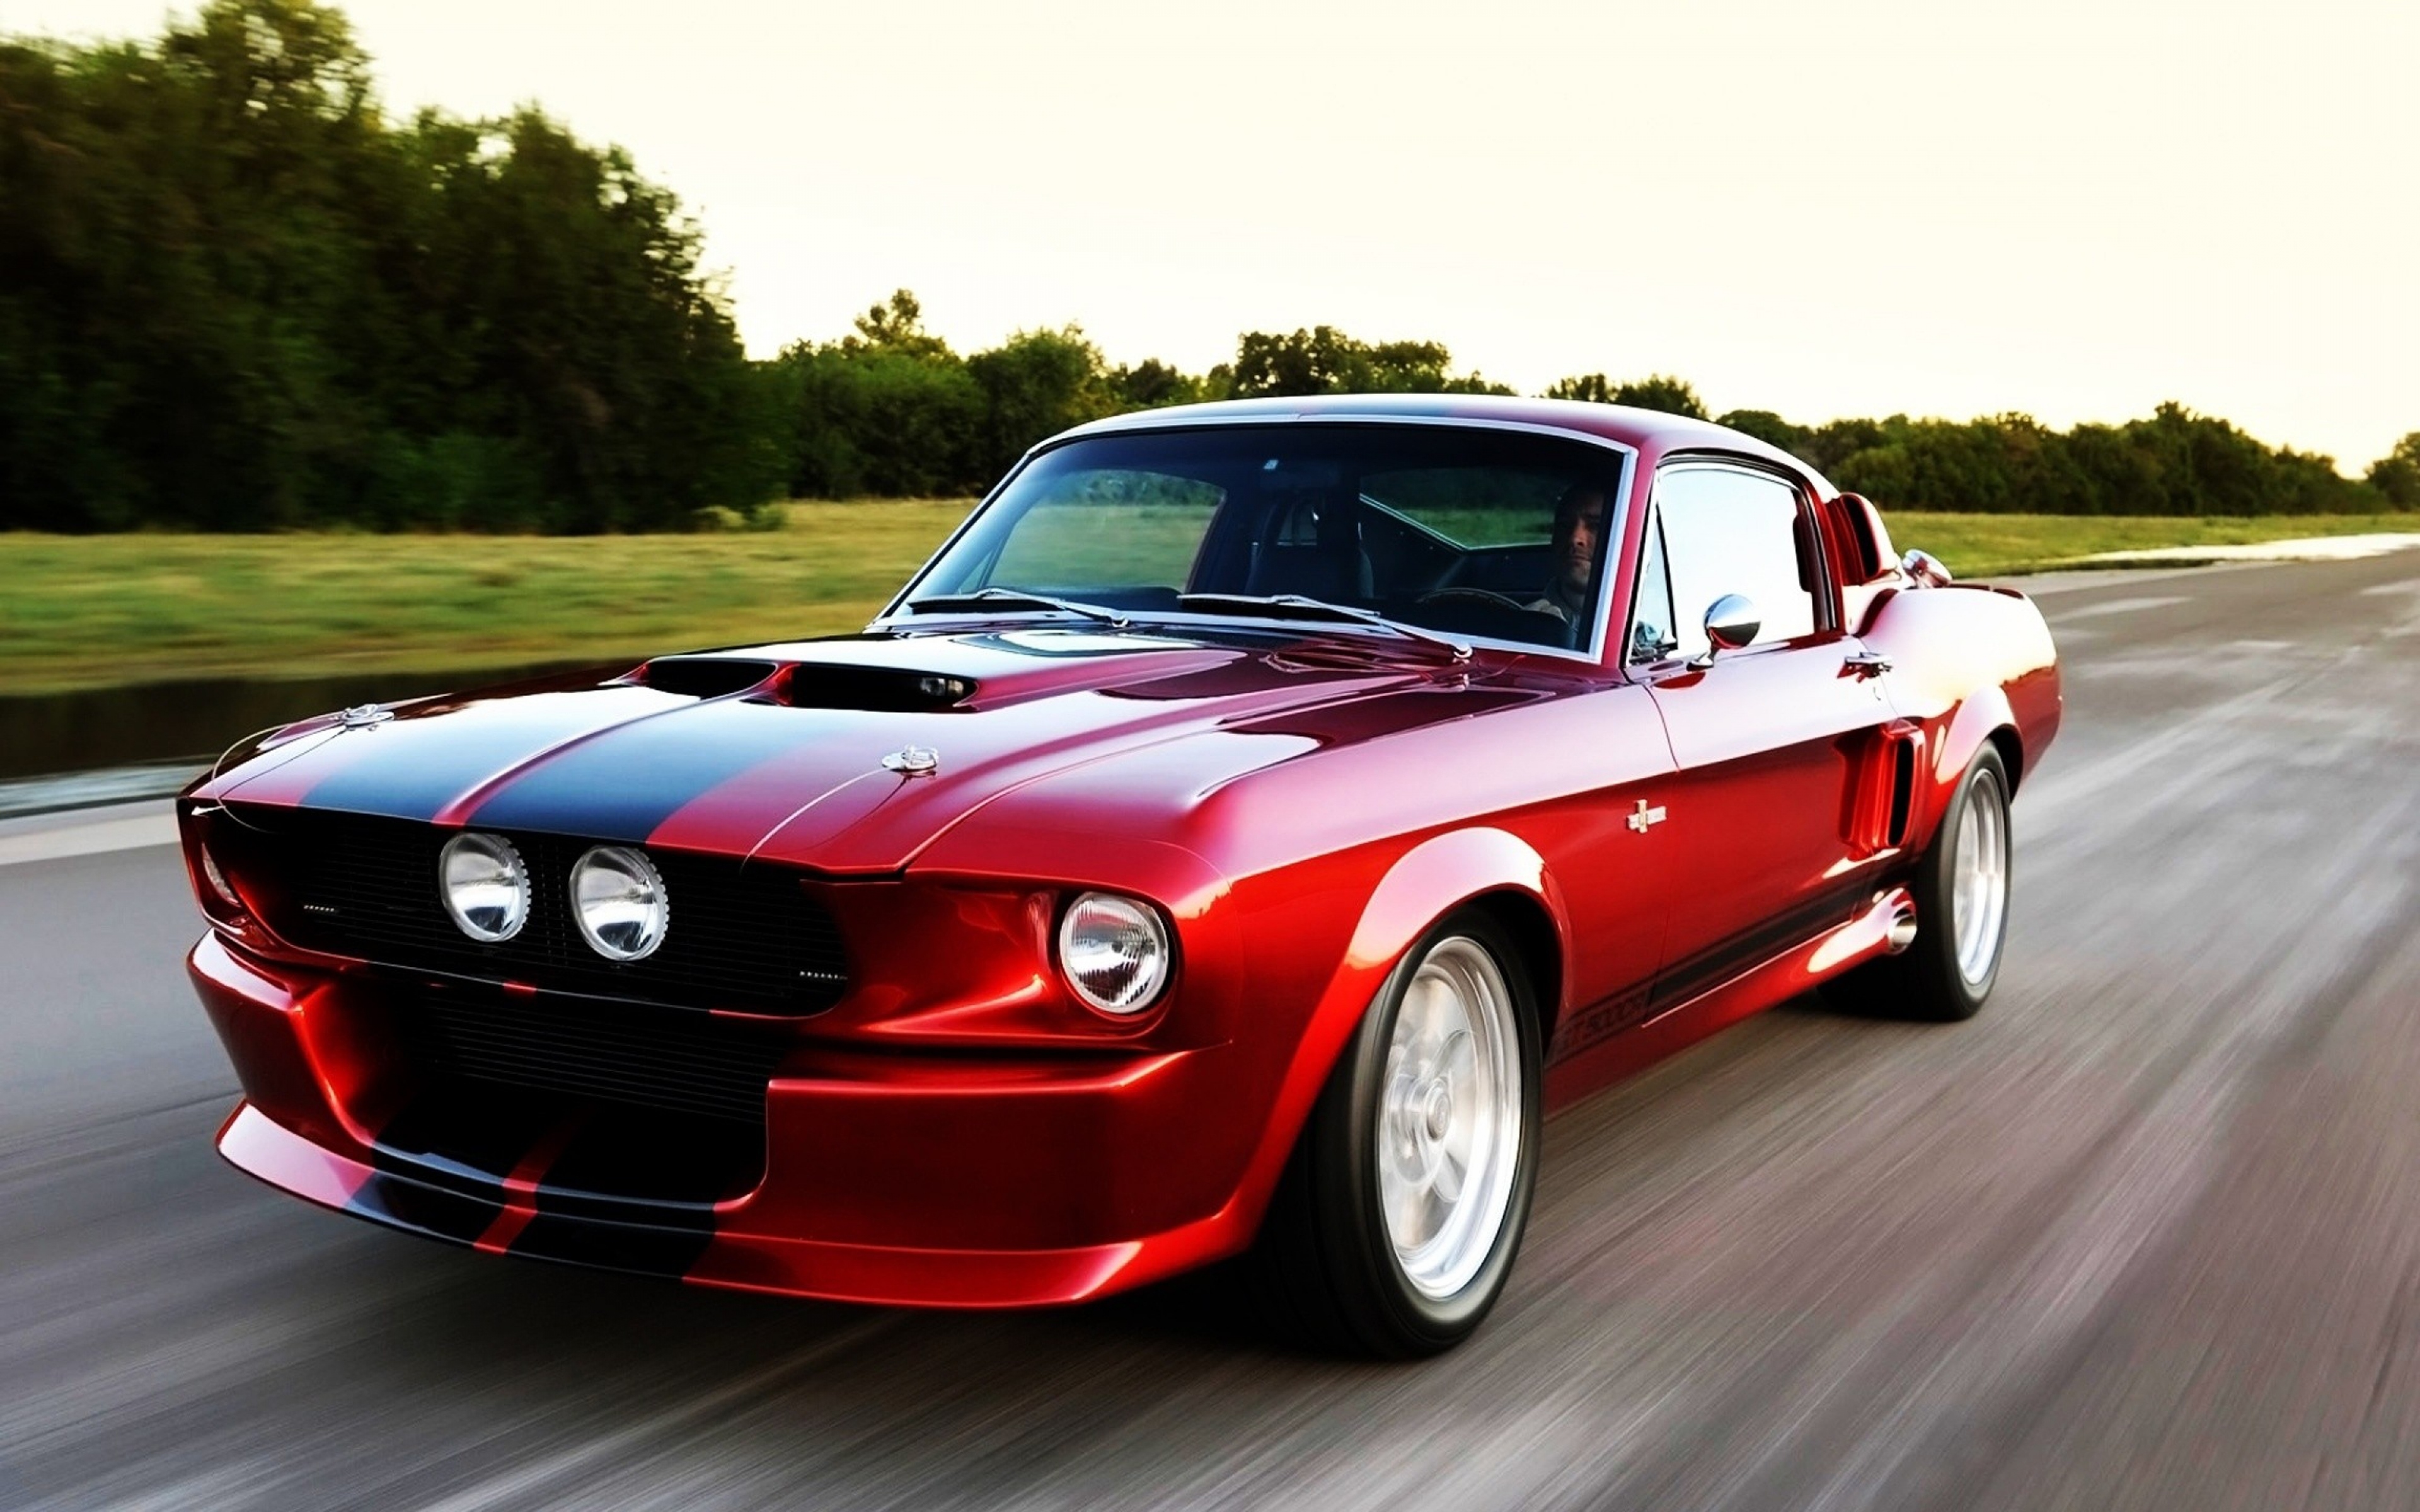 Download Wallpaper 3840x2400 Ford Ford mustang Red car Ultra HD 4K